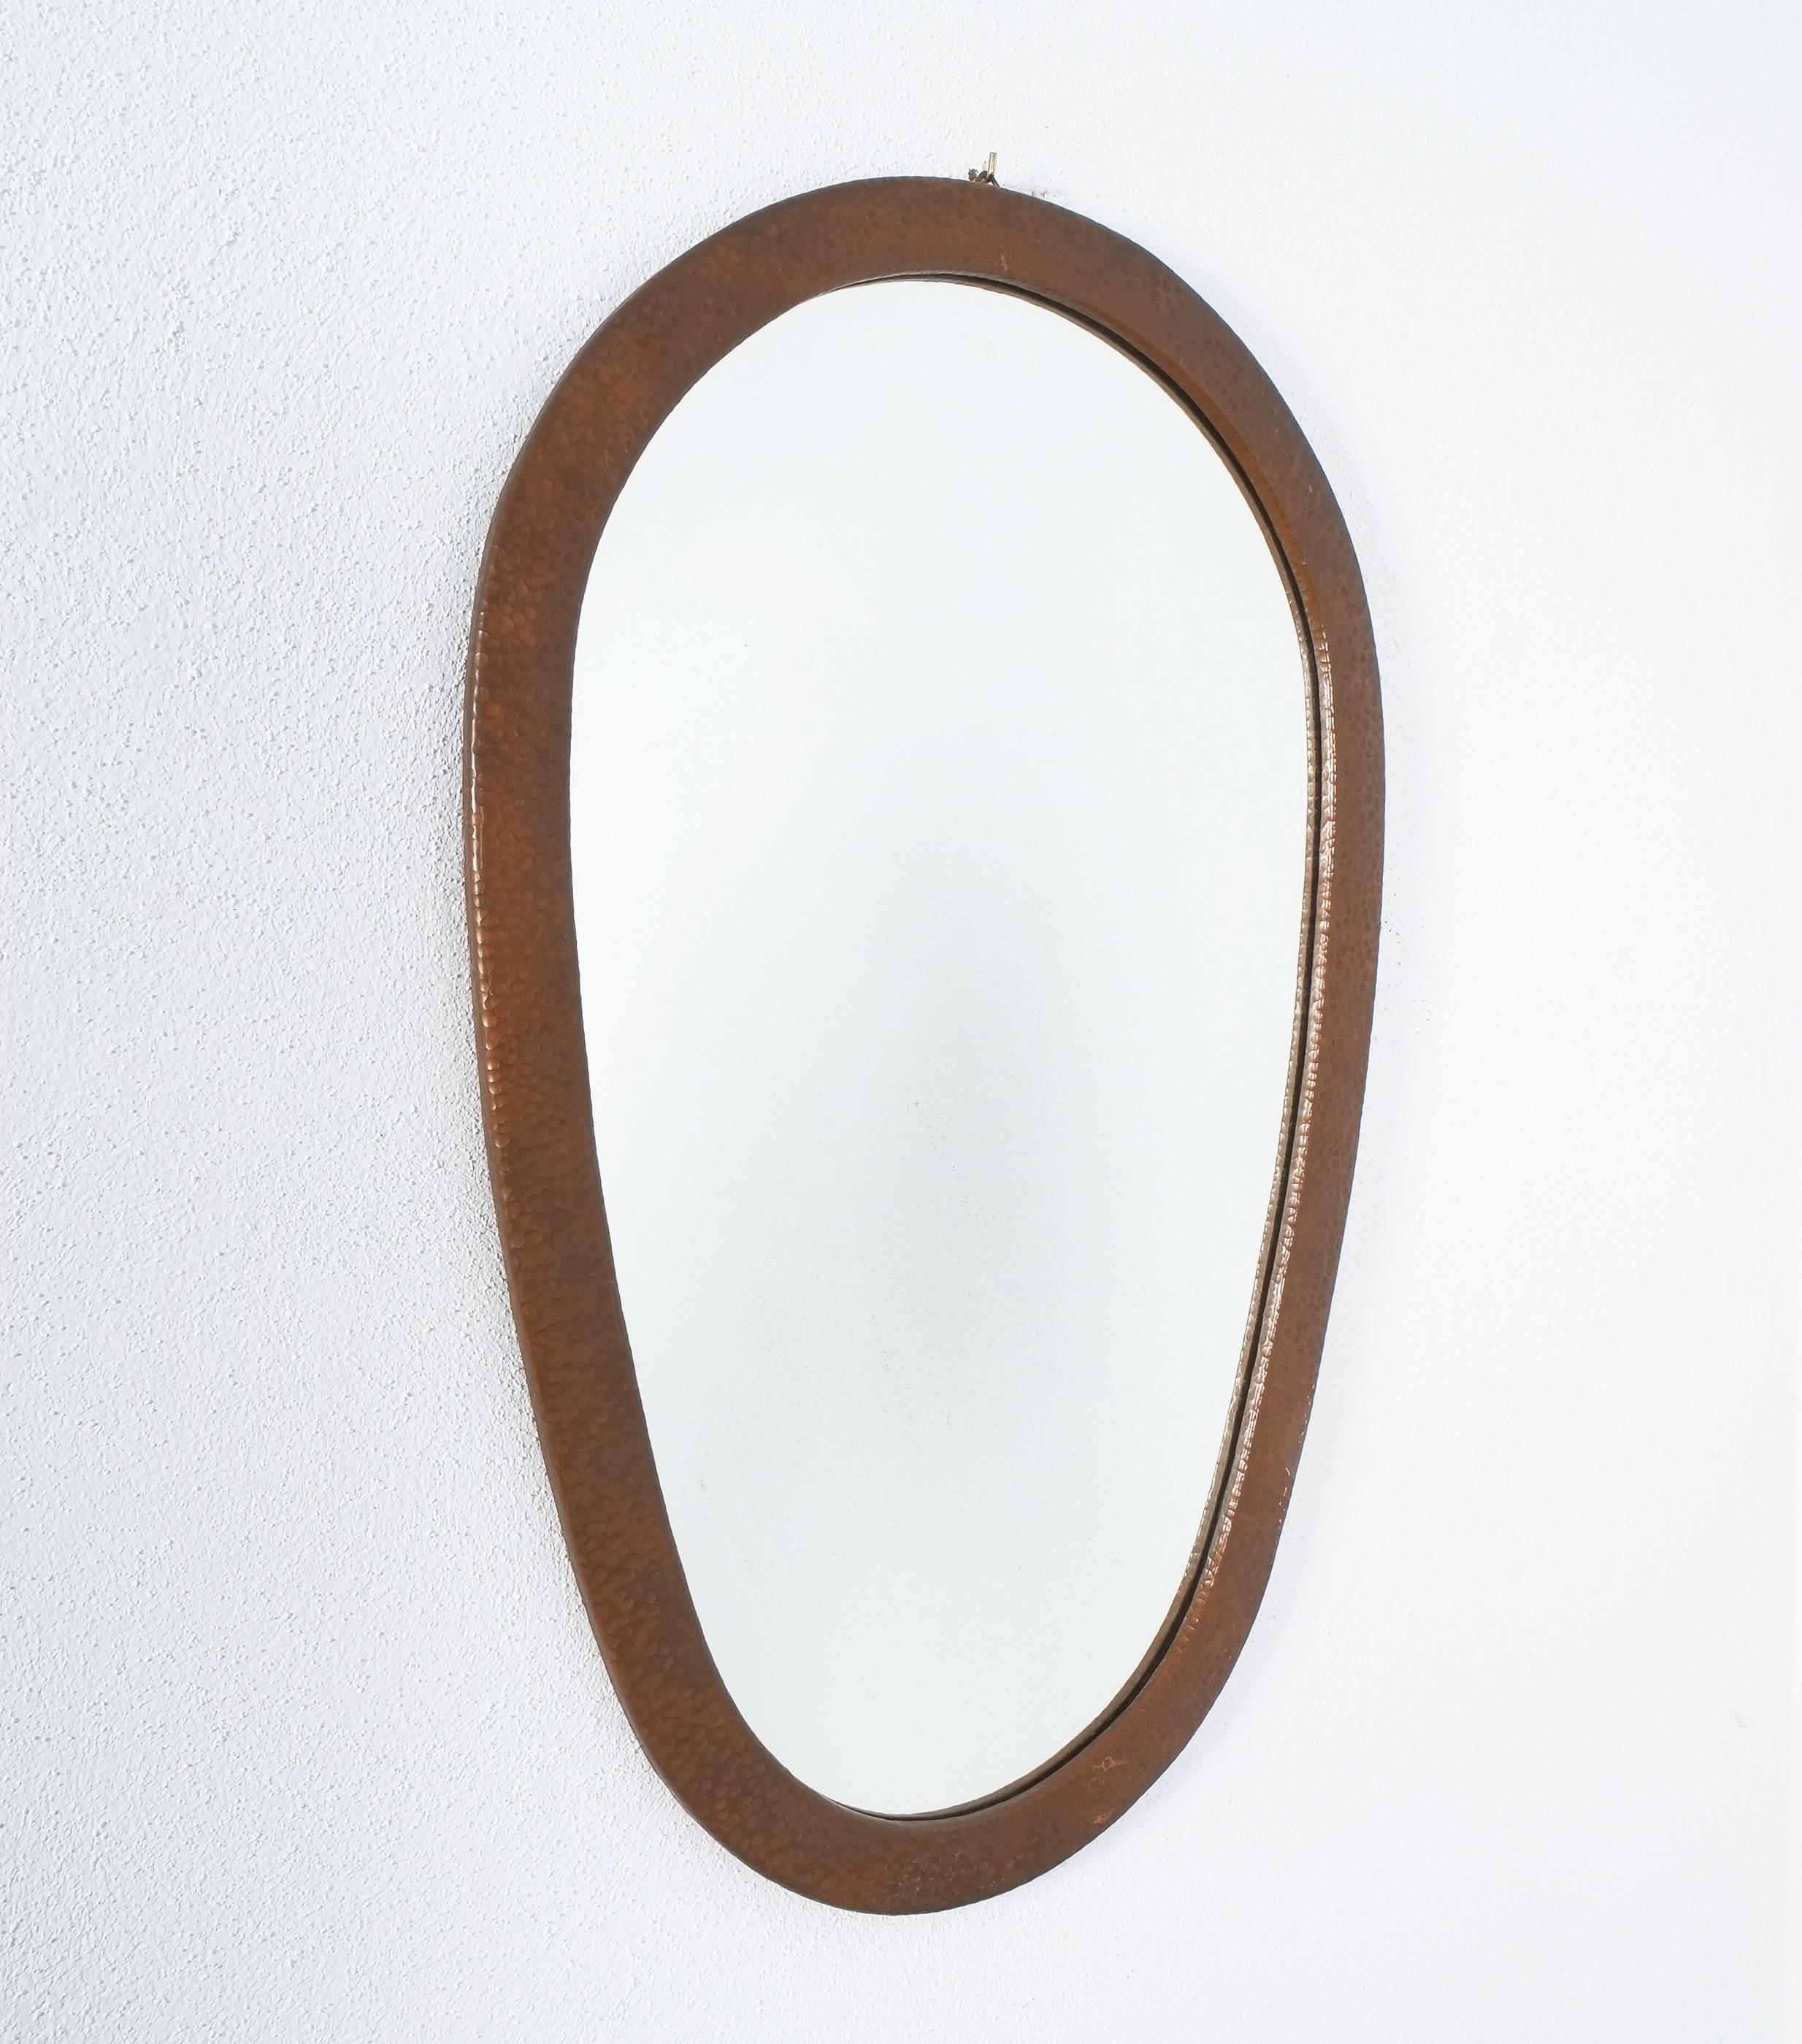 Mid-Century Modern Wall Mirror Large Copper Hammered Frame, Midcentury, Italy For Sale